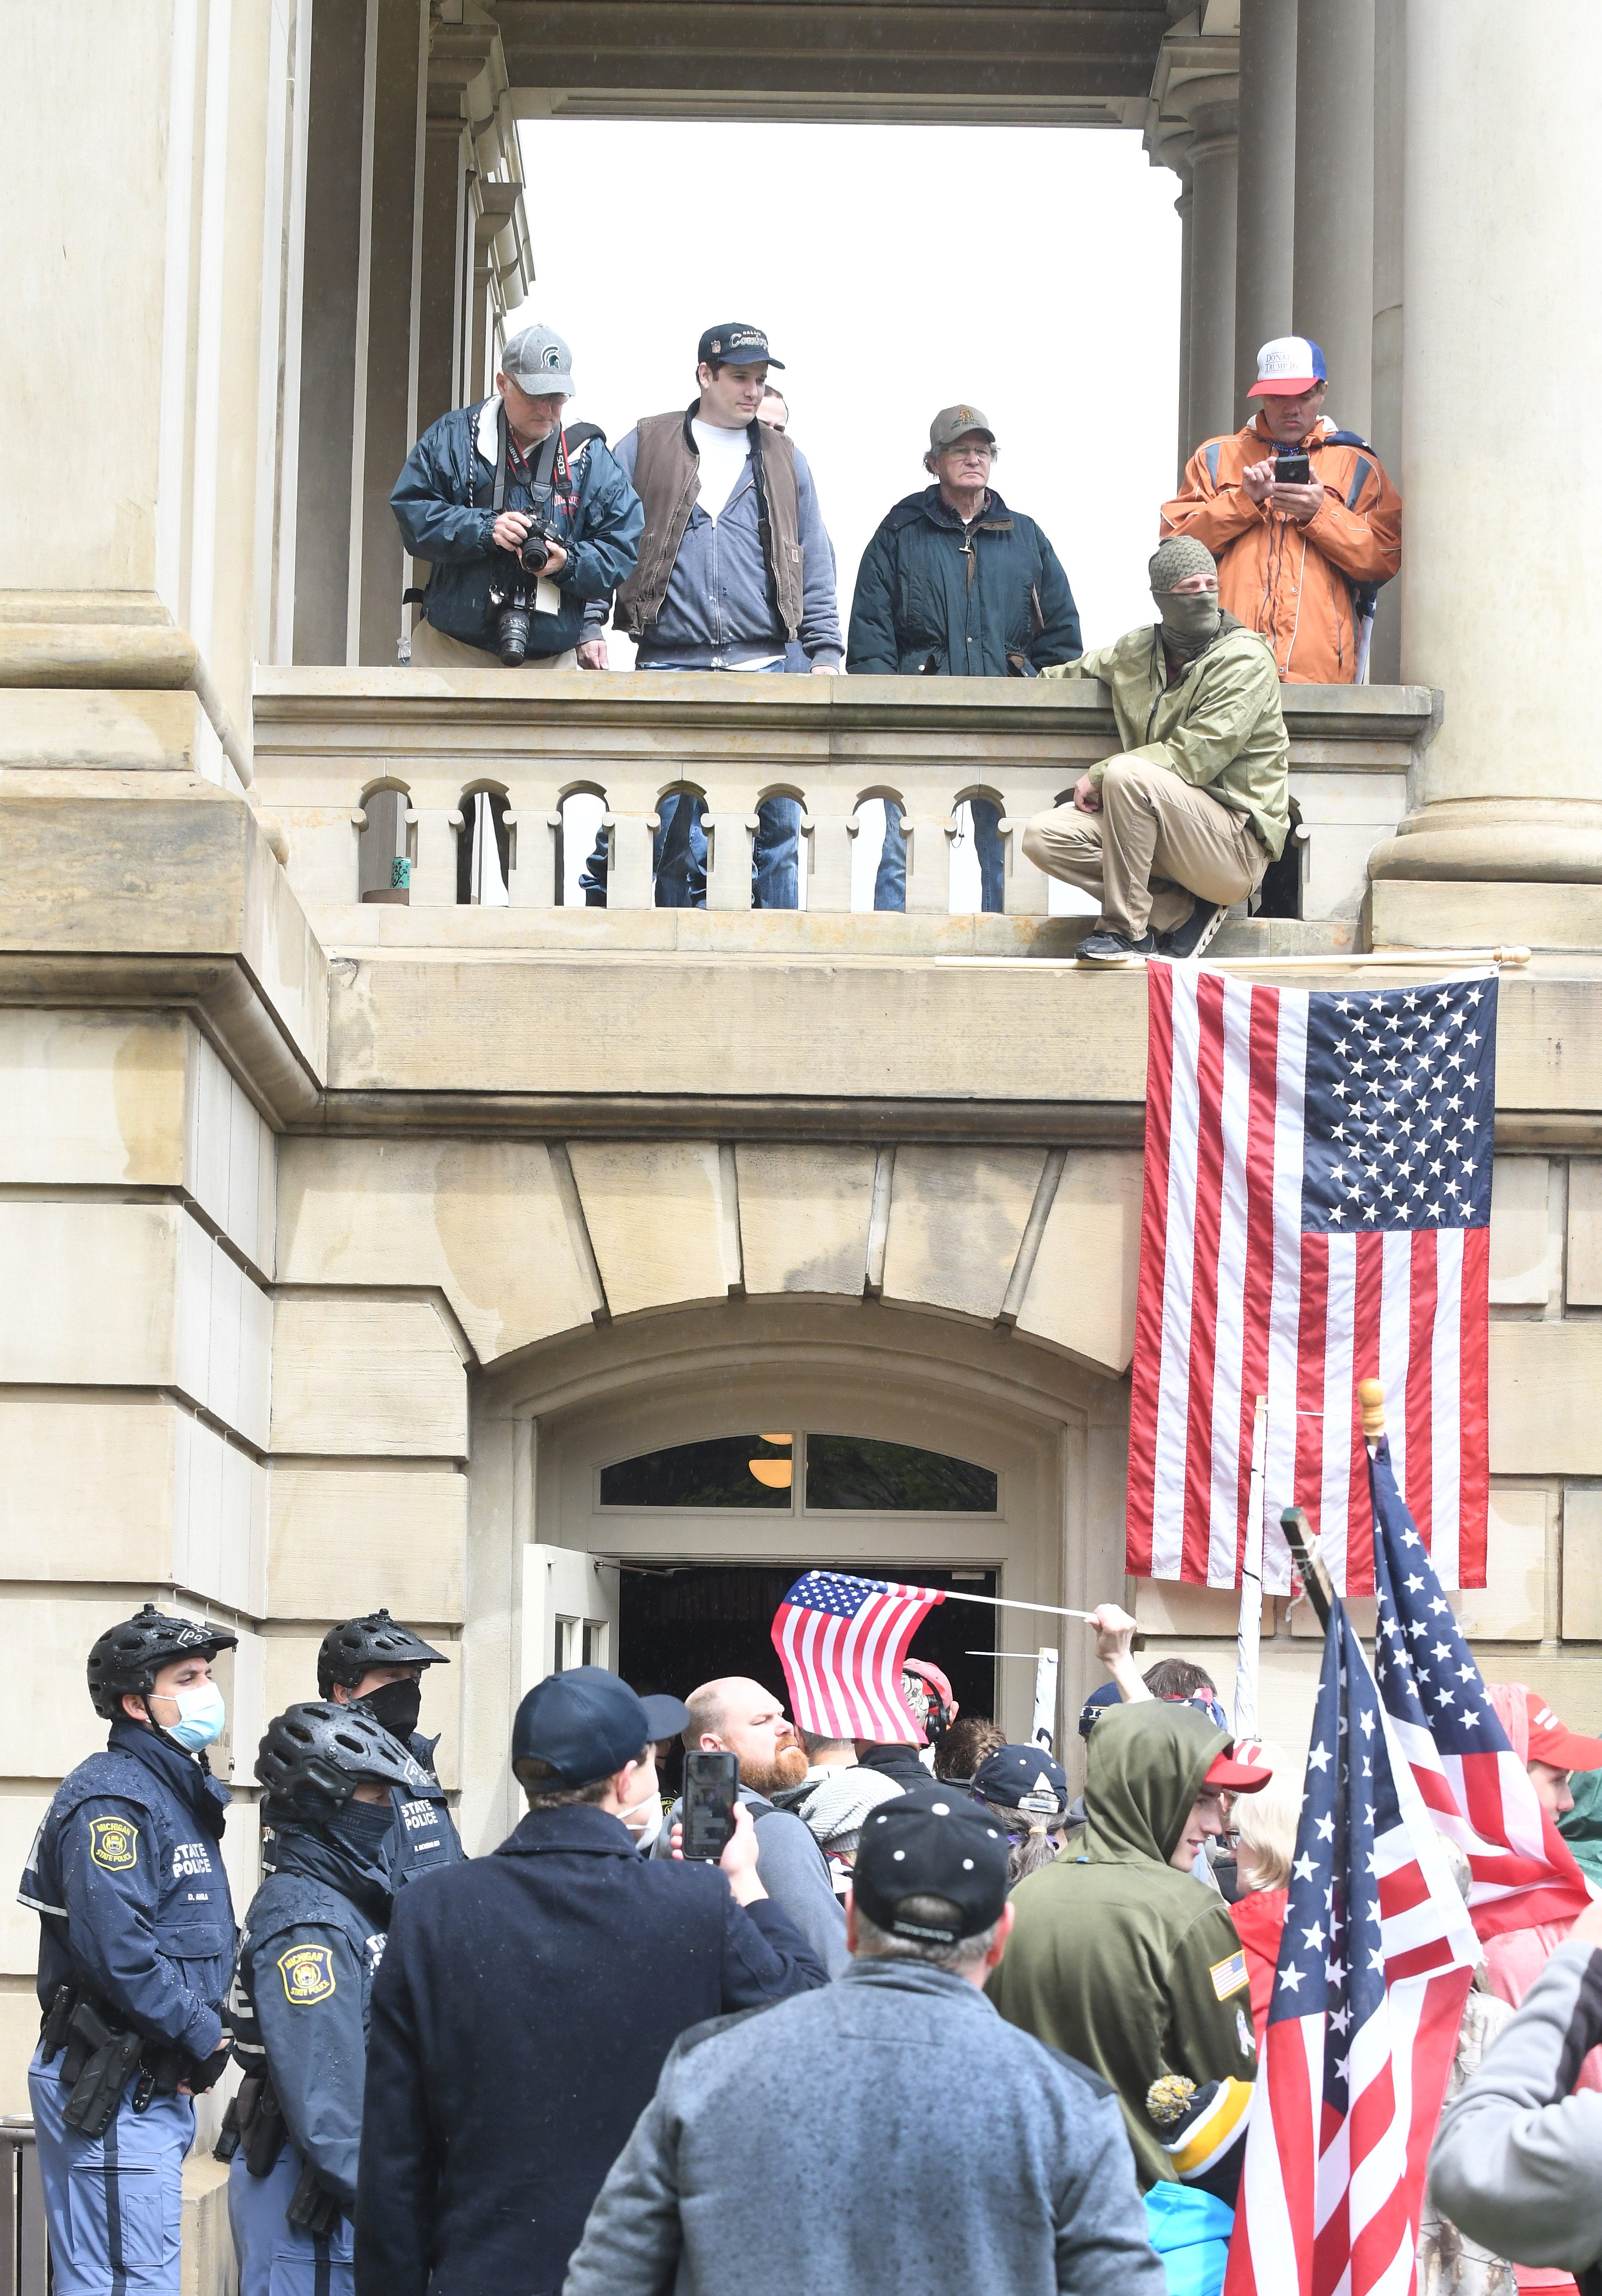 Protesters wait in line to go into the Capitol after the " American Patriot Rally " in Lansing on April 30, 2020.